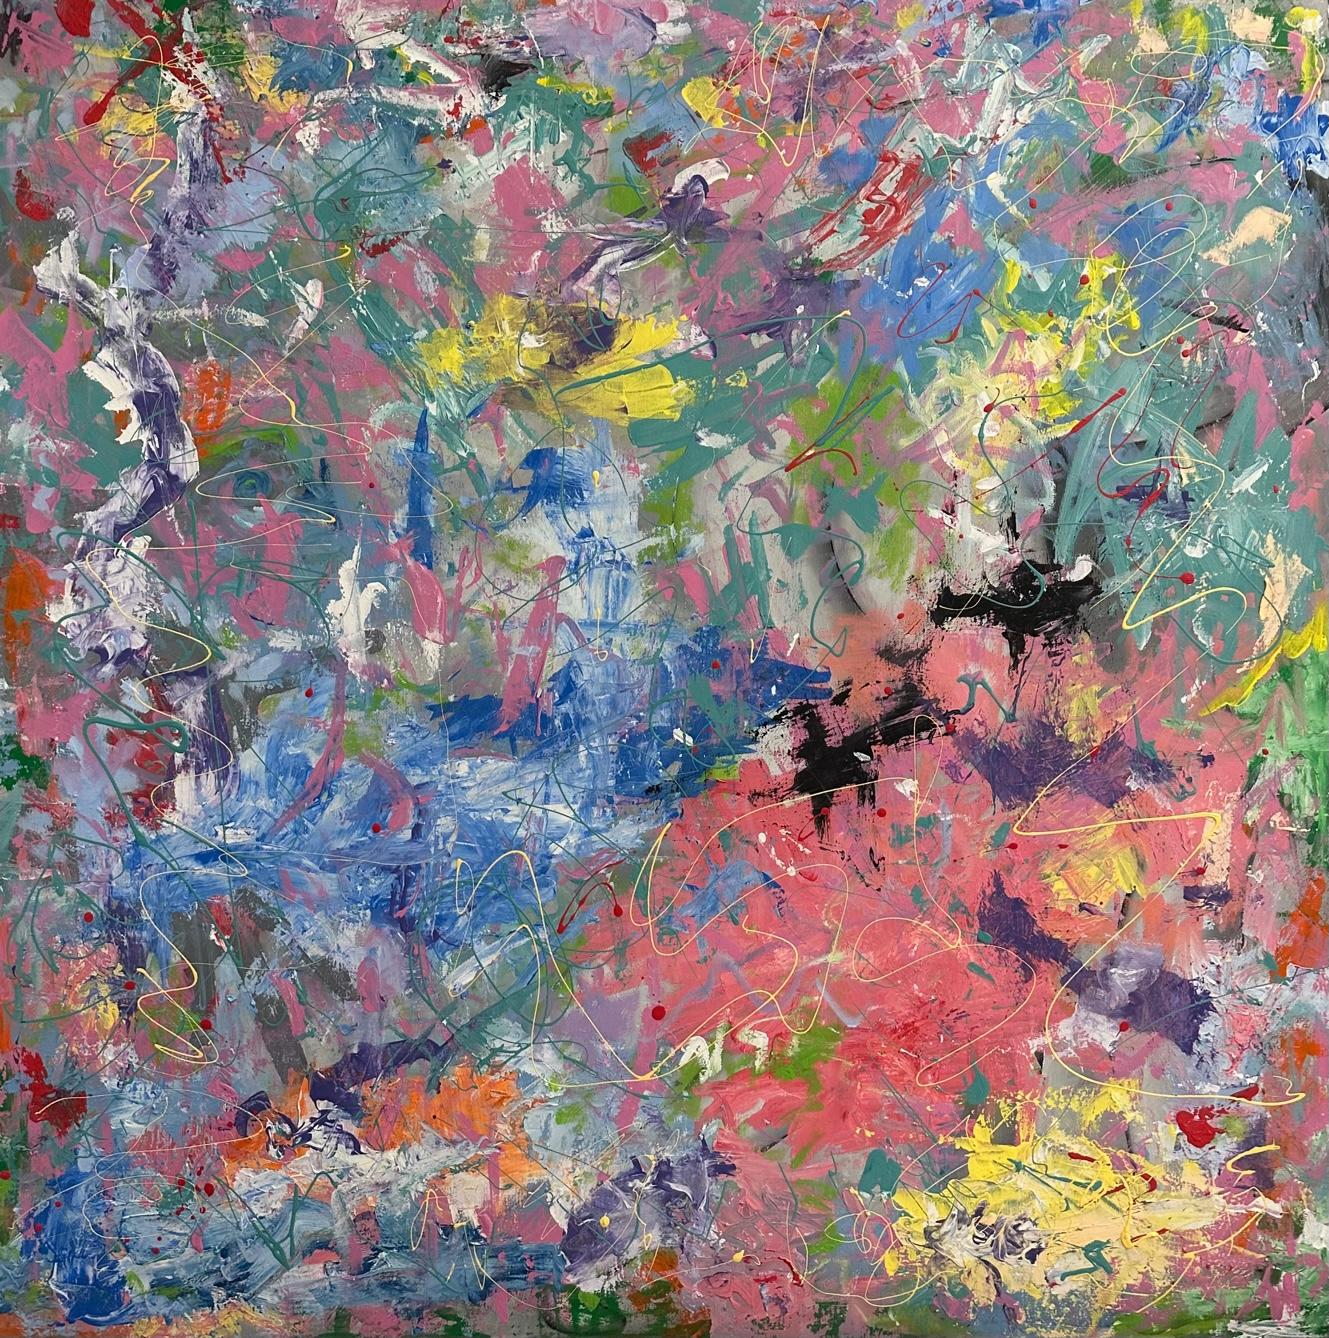 Joy - Abstract Painting By Beverly Bigwood

About the artist, Beverly Bigwood
Award-winning Artist Beverly Bigwood (Bigwood Art) received the highest compliment an artist can receive in their career; Beverly’s artwork was stolen from a Westwood